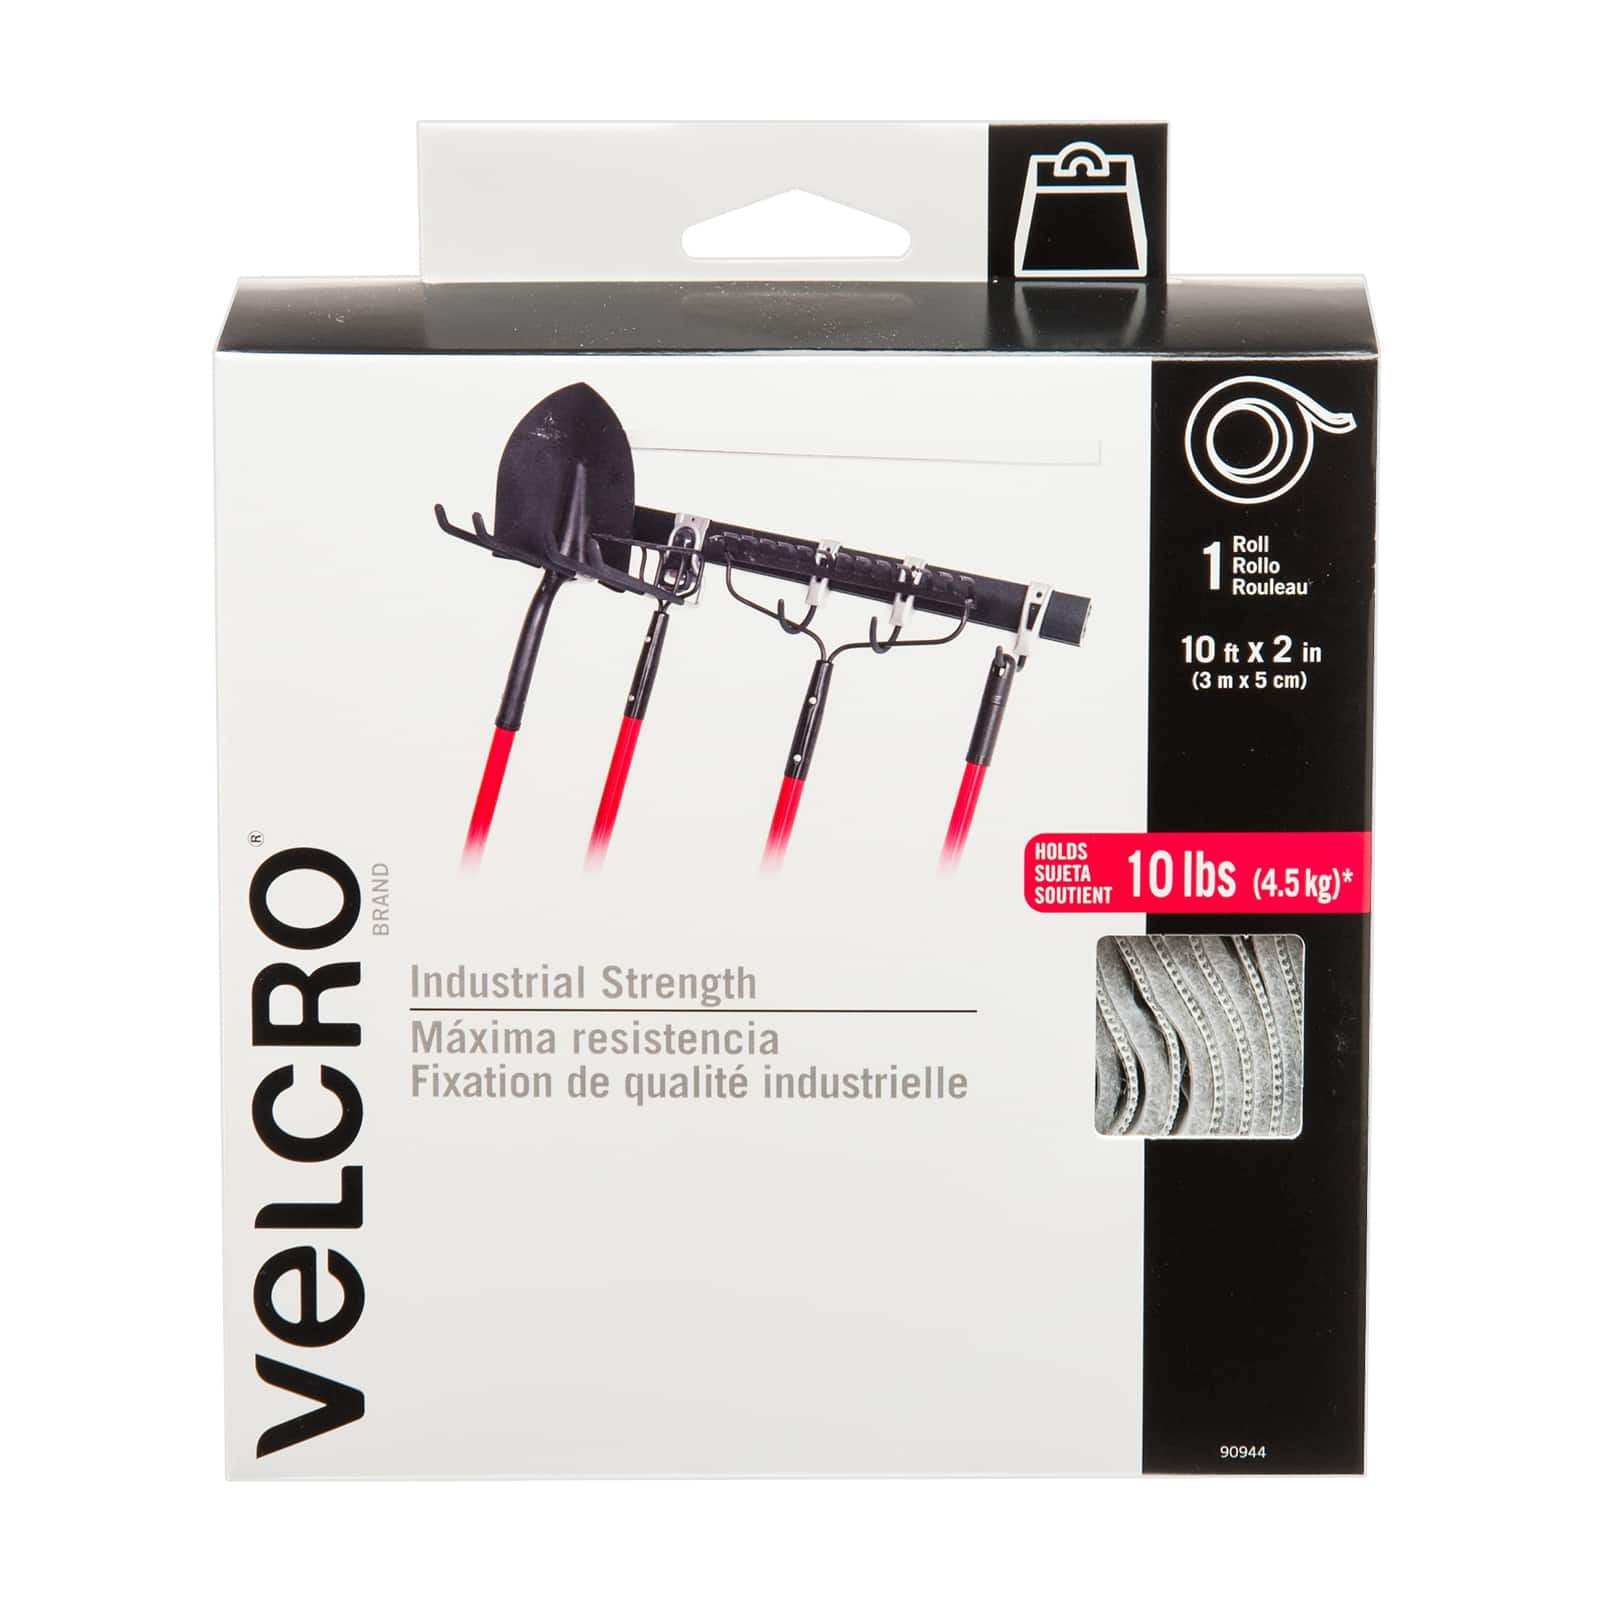  VELCRO Brand - 91100 Industrial Strength Low Profile Fasteners  – Heavy Duty Professional Hold with a Flush Surface to Surface Mount -  Holds up to 10 lbs. - 10ft x 1in Roll Tape, Black : Electronics